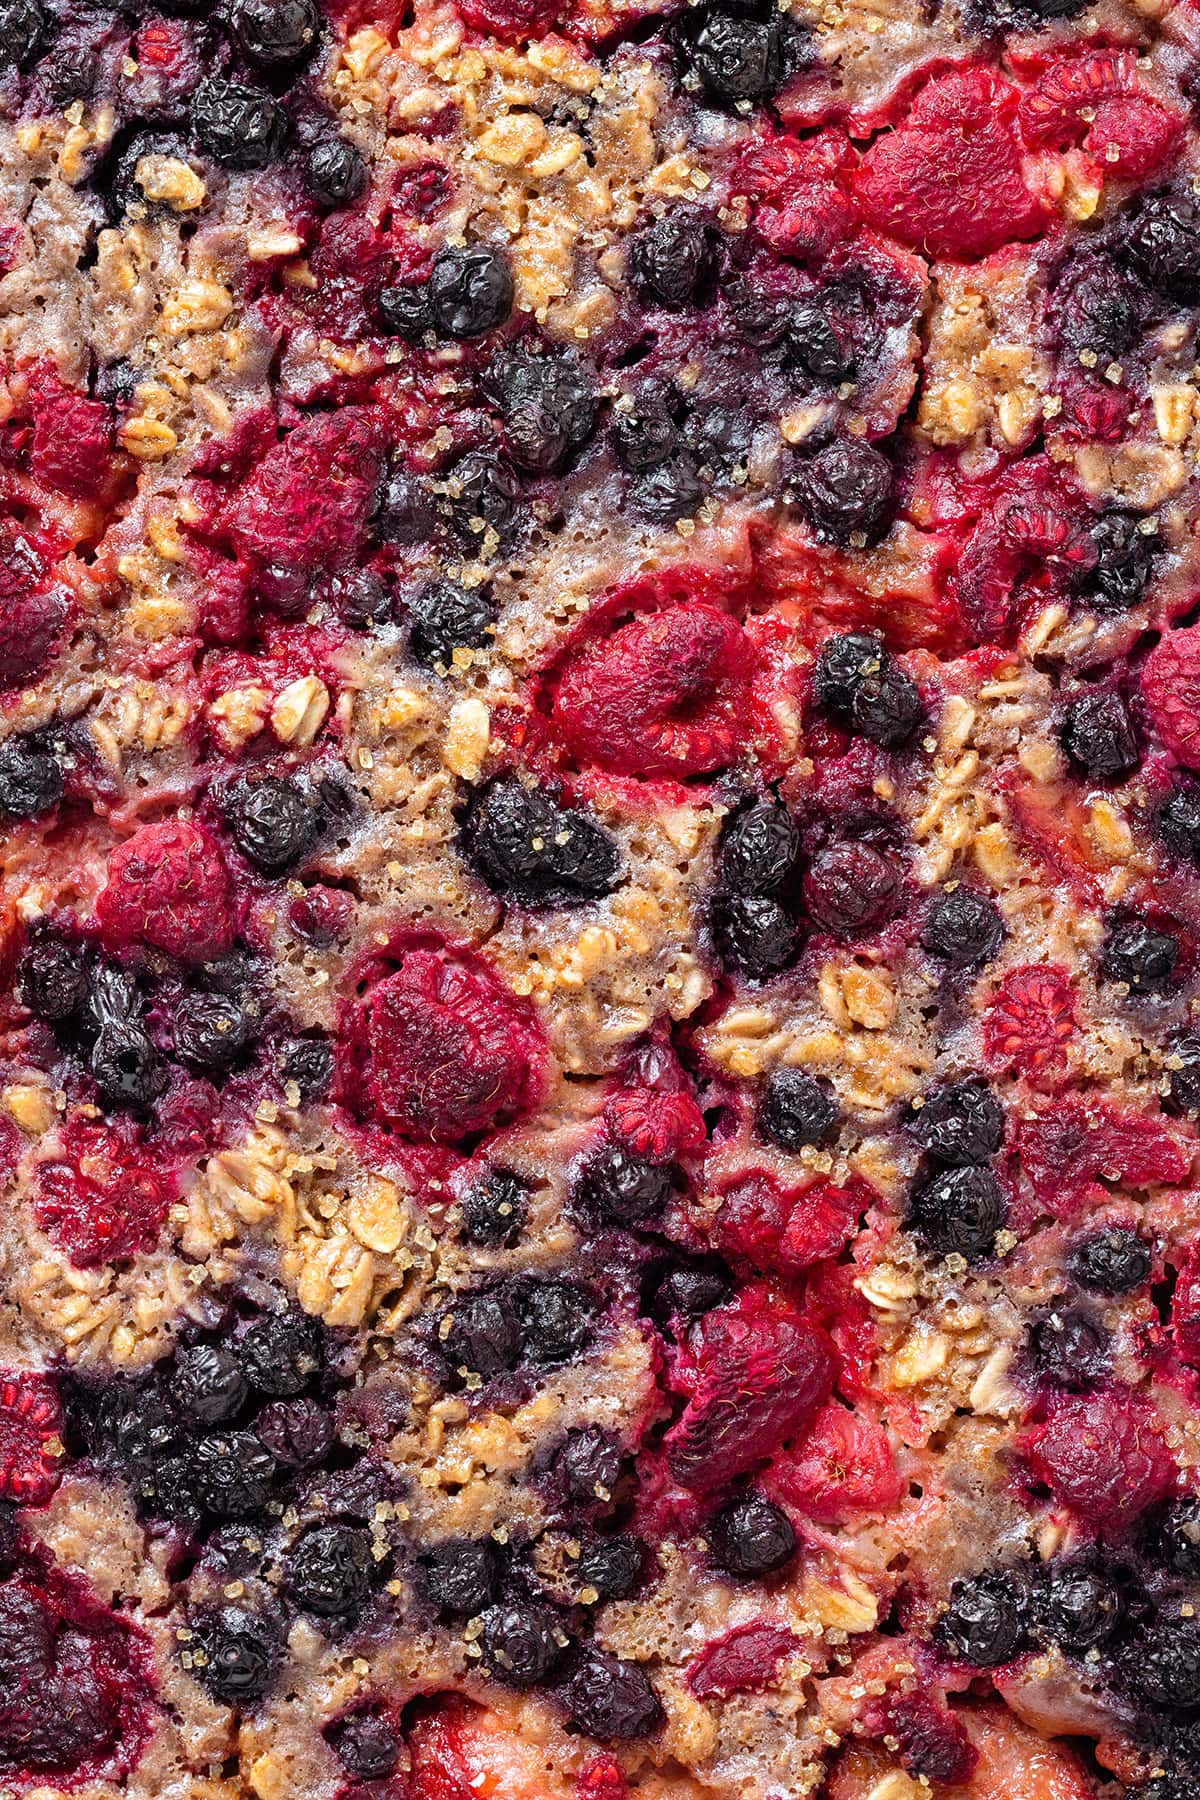 Baked oatmeal with mixed berries showing the crispy exterior with caramelized berries.